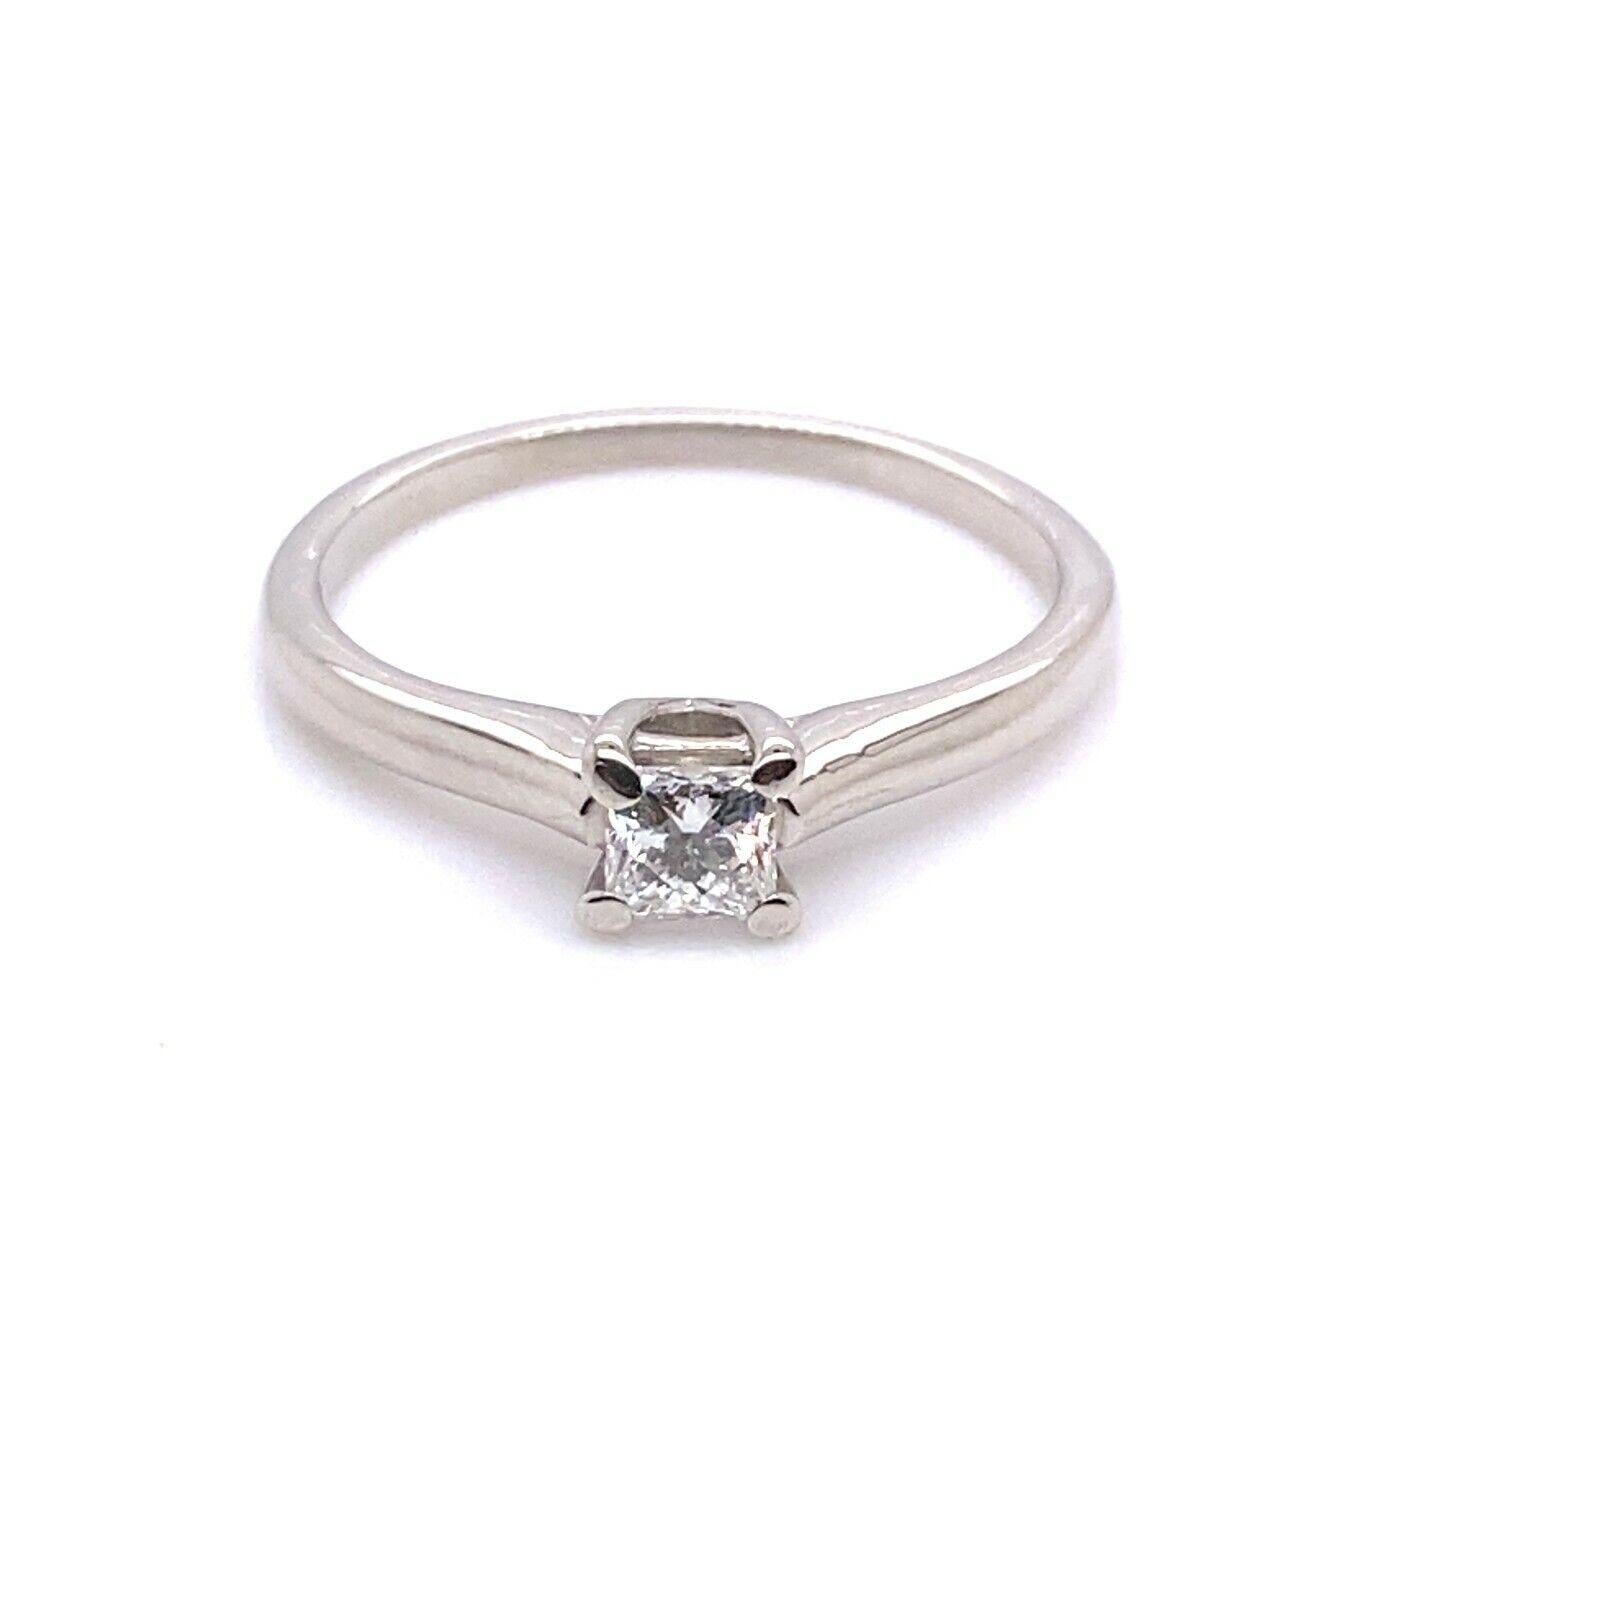 IGI Certified 0.33ct F/VS2 Princess Cut Solitaire Diamond Ring

Additional Information:
Total Diamond Weight: 0.33ct
Diamond Colour: F
Diamond Clarity: VS2
Total Weight: 4g
Ring Size: O
Width of Band: 1.8mm
Width of Head: 4.8mm
Length of Head: